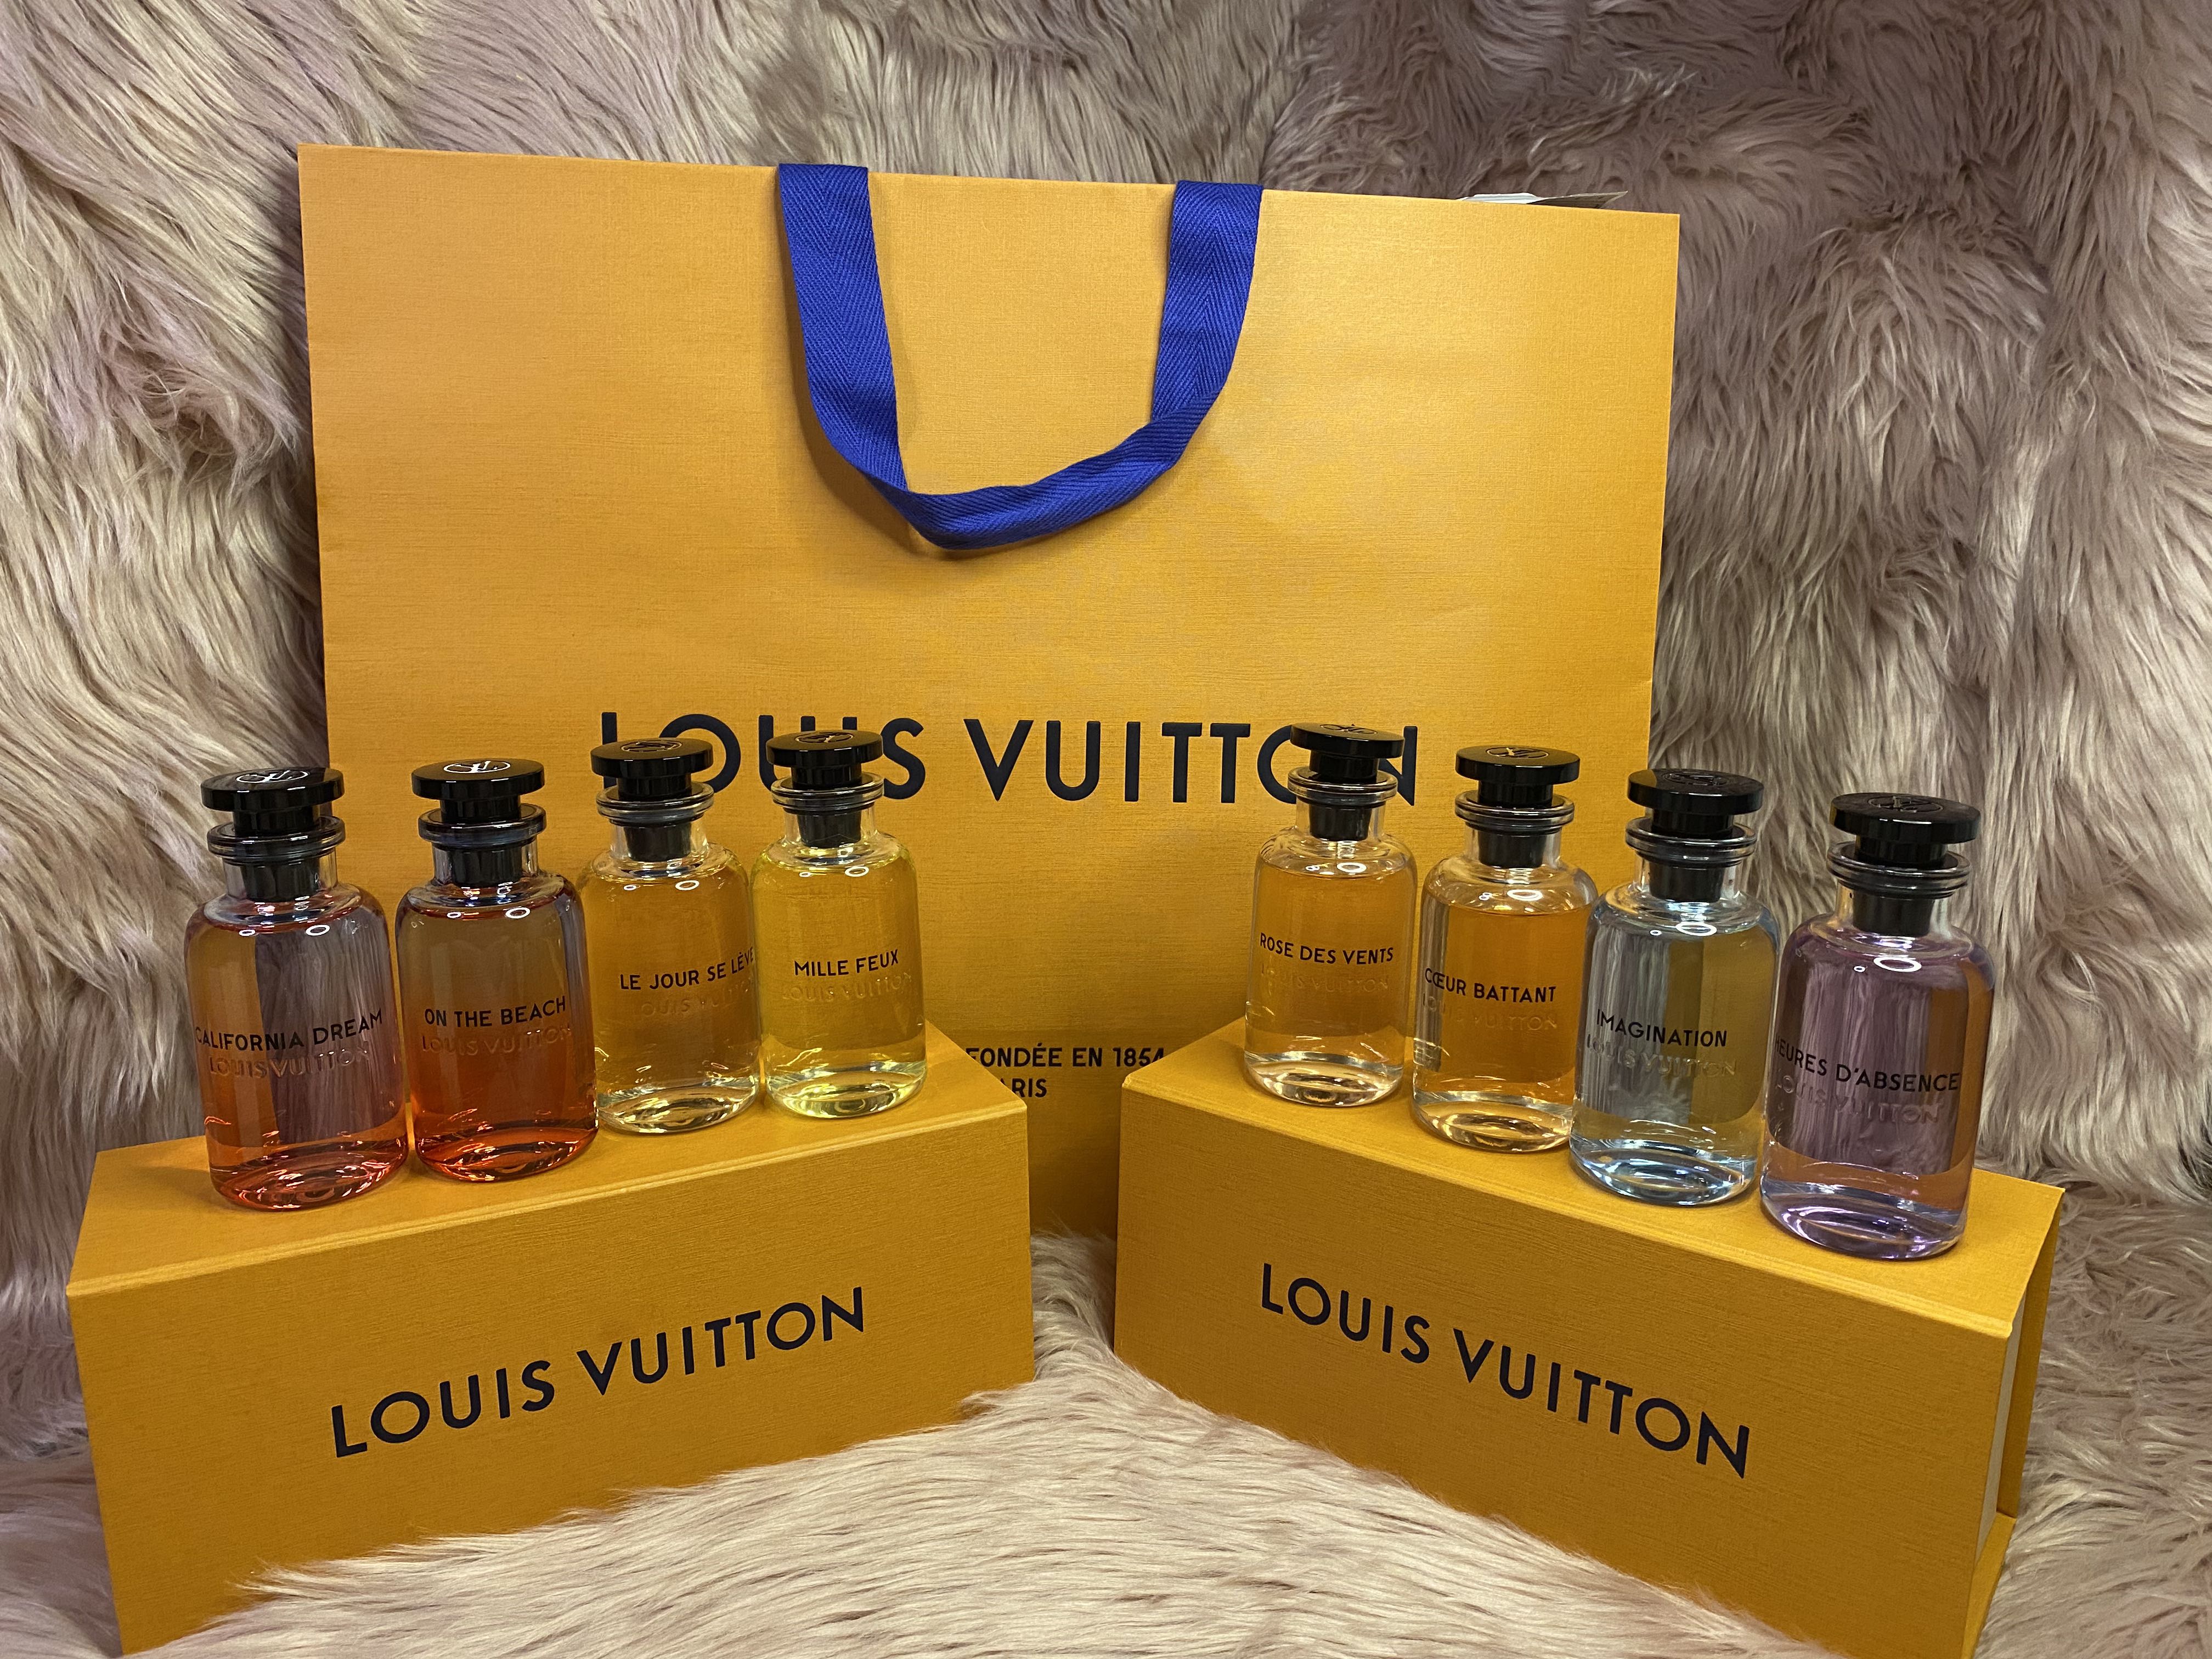 Unboxing of LV Coeur Battant Travel Spray! (Love this scent so much th